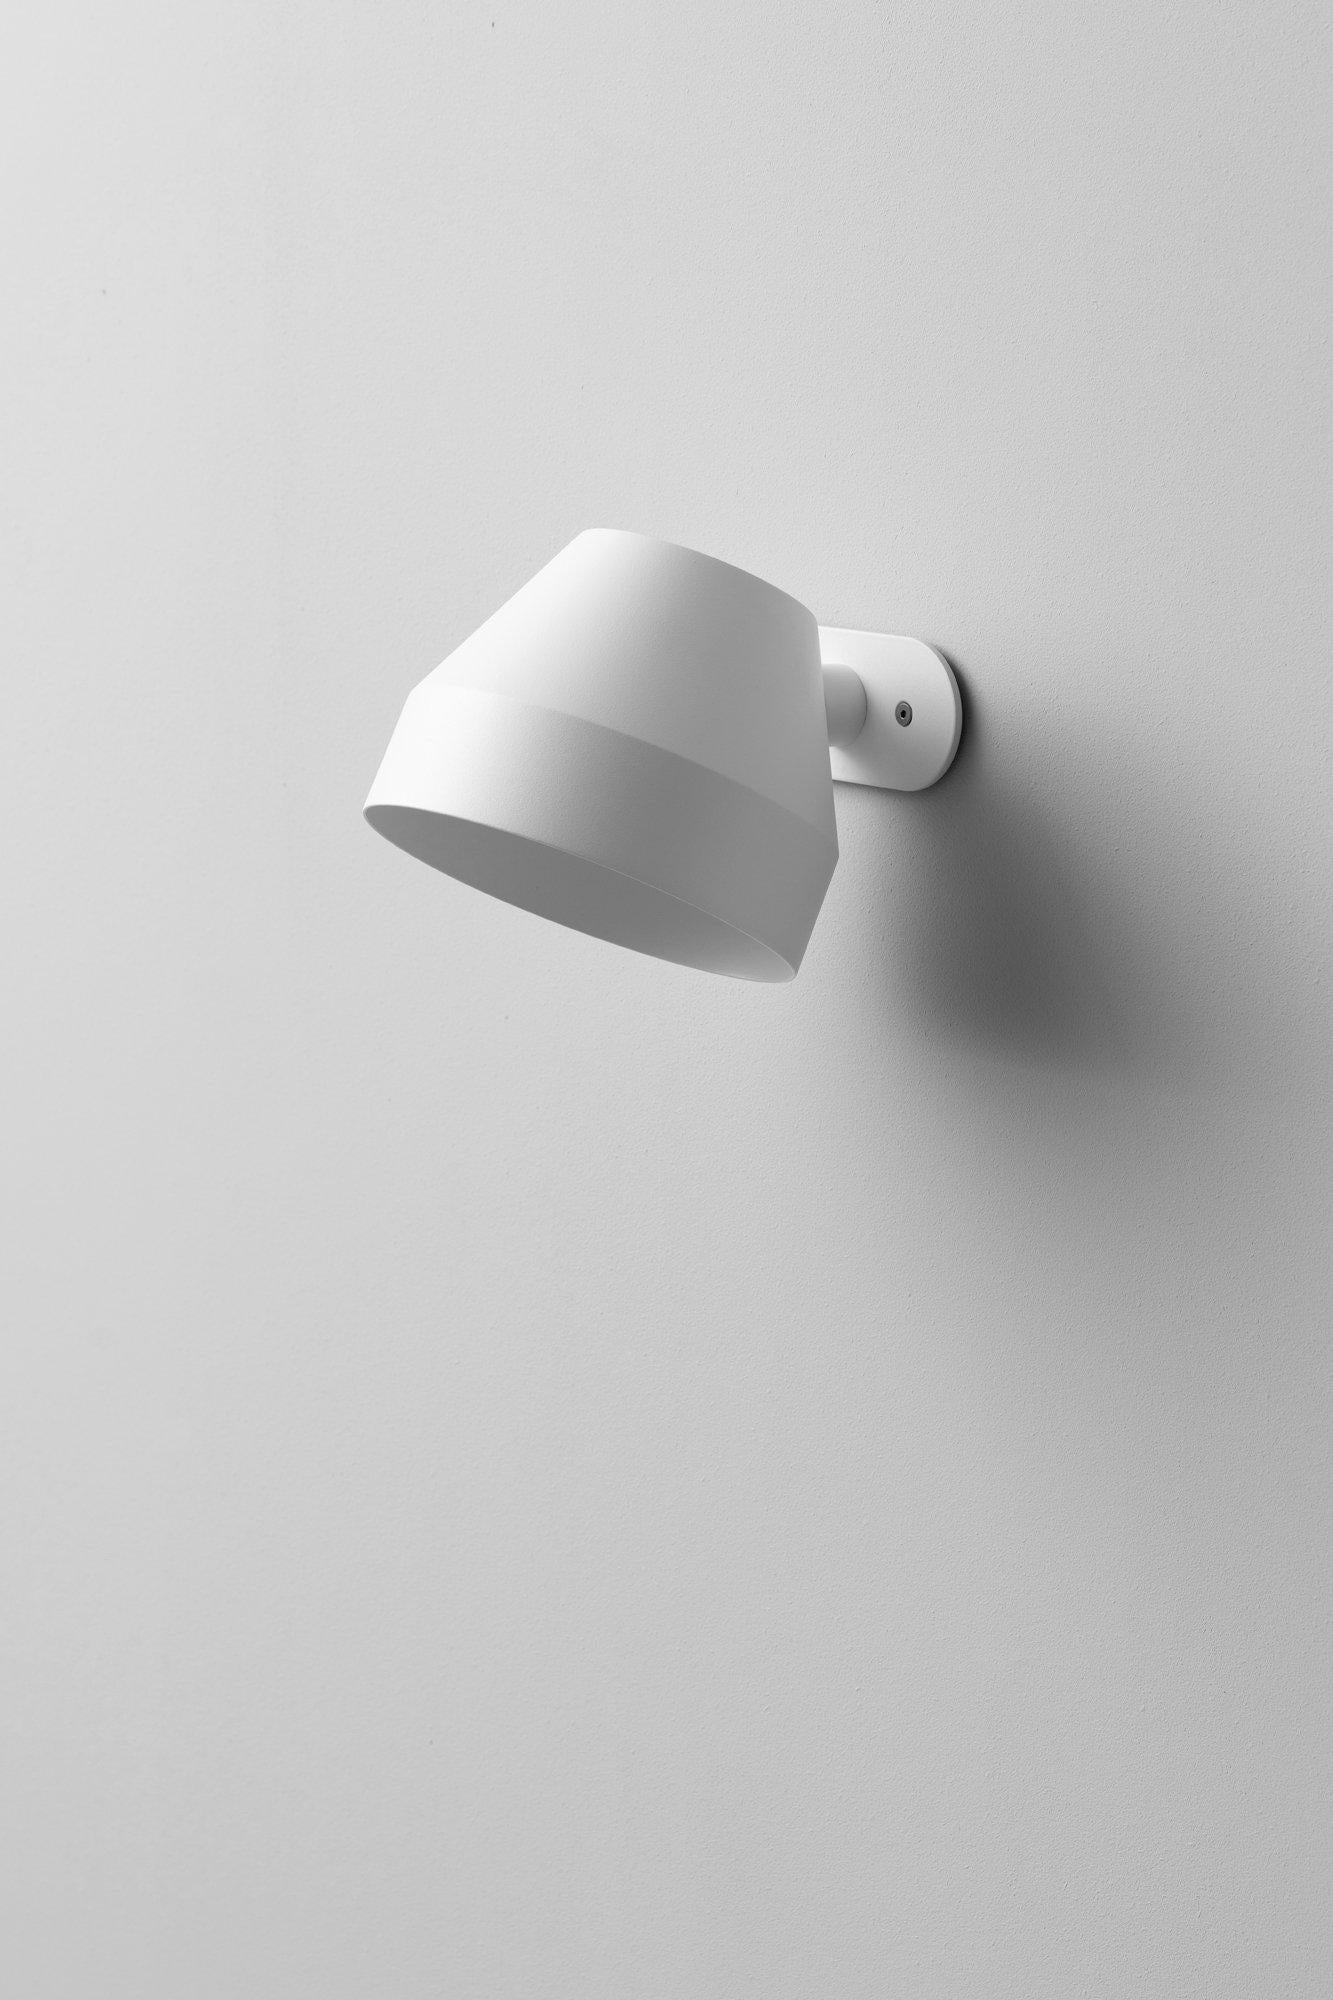 White Cap Wall Lamp by +kouple
Dimensions: D 20 x W 16 x H 16,2 cm.
Materials: Powder-coated steel.

Available in different color options. Please contact us.

All our lamps can be wired according to each country. If sold to the USA it will be wired